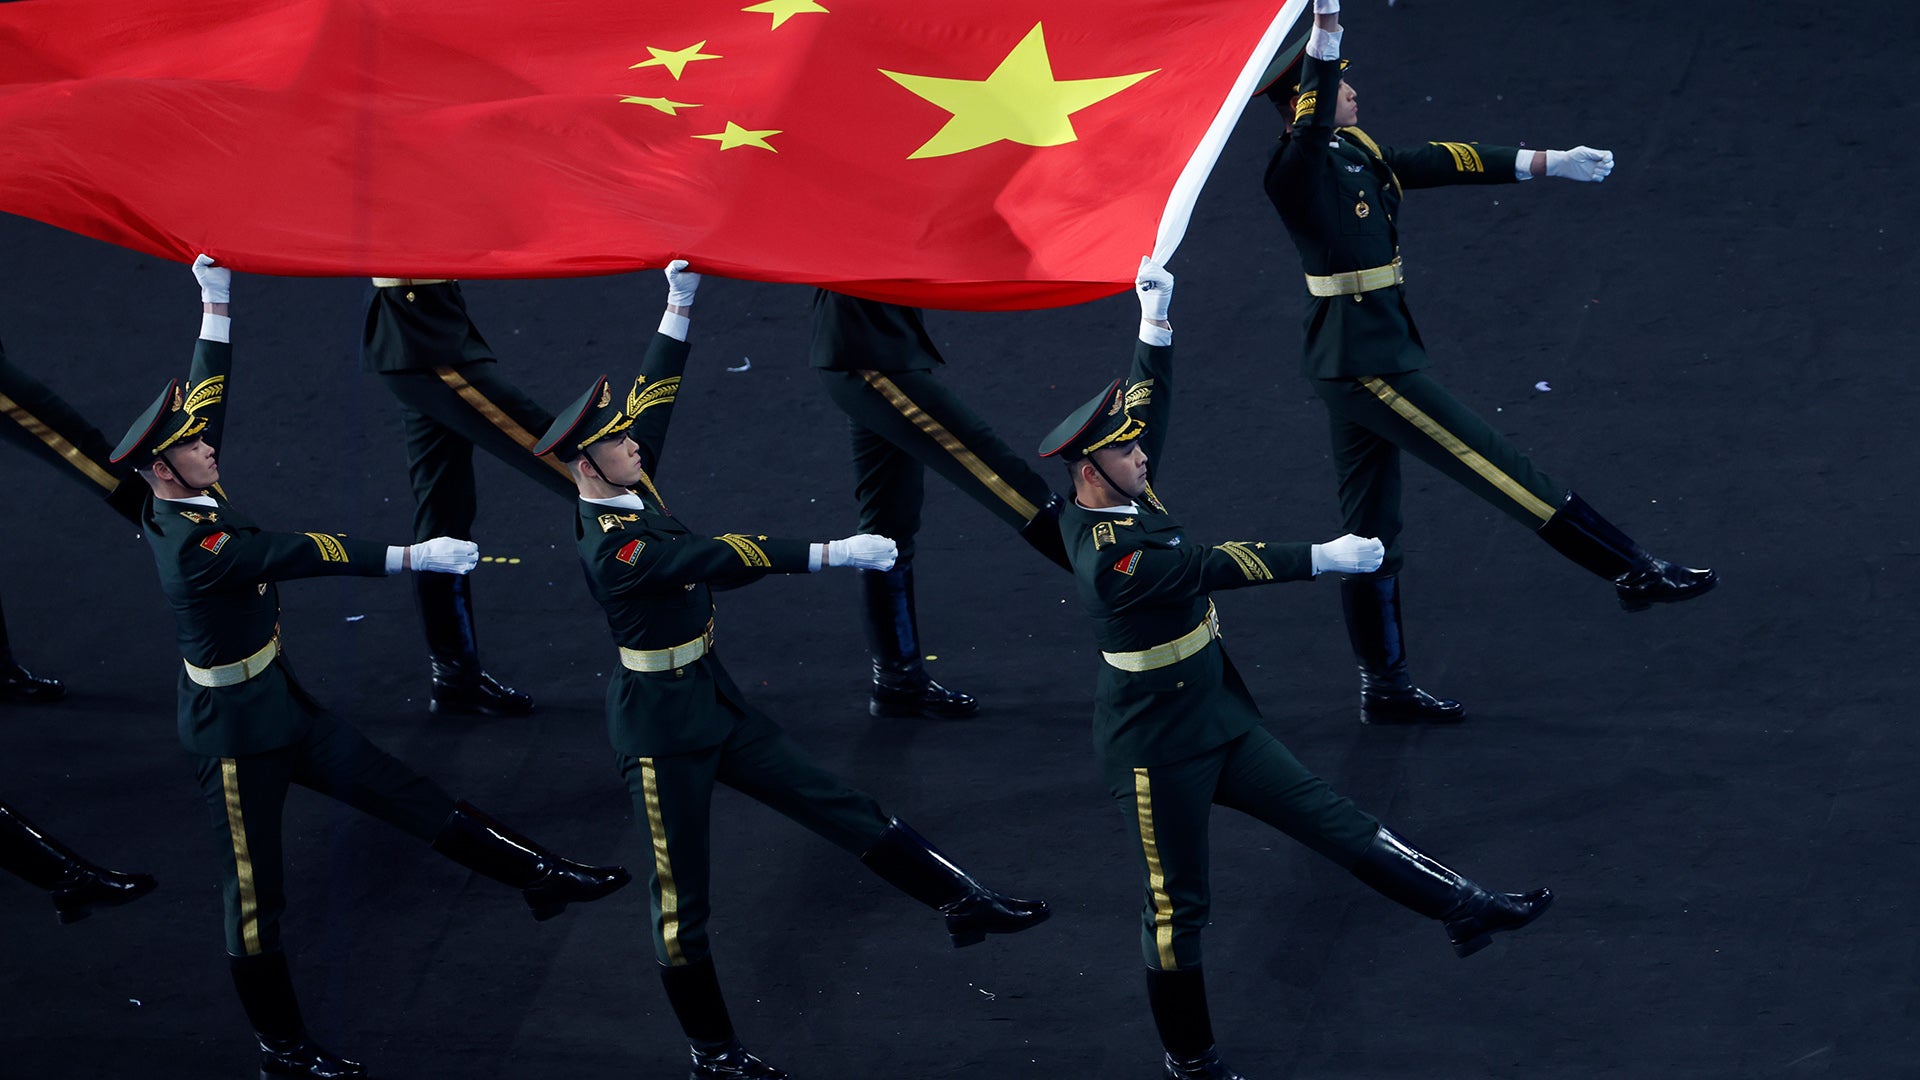 BEIJING, CHINA - FEBRUARY 4: Soldiers carry Chinese flag during the opening ceremony of 2022 Beijing Winter Olympics in Beijing, China, 04 February 2022. The Olympic Games in Beijing will continue until Feb. 20, when the medal games and closing ceremony will take place. (Photo by Aleksey Kirchu/Anadolu Agency via Getty Images)